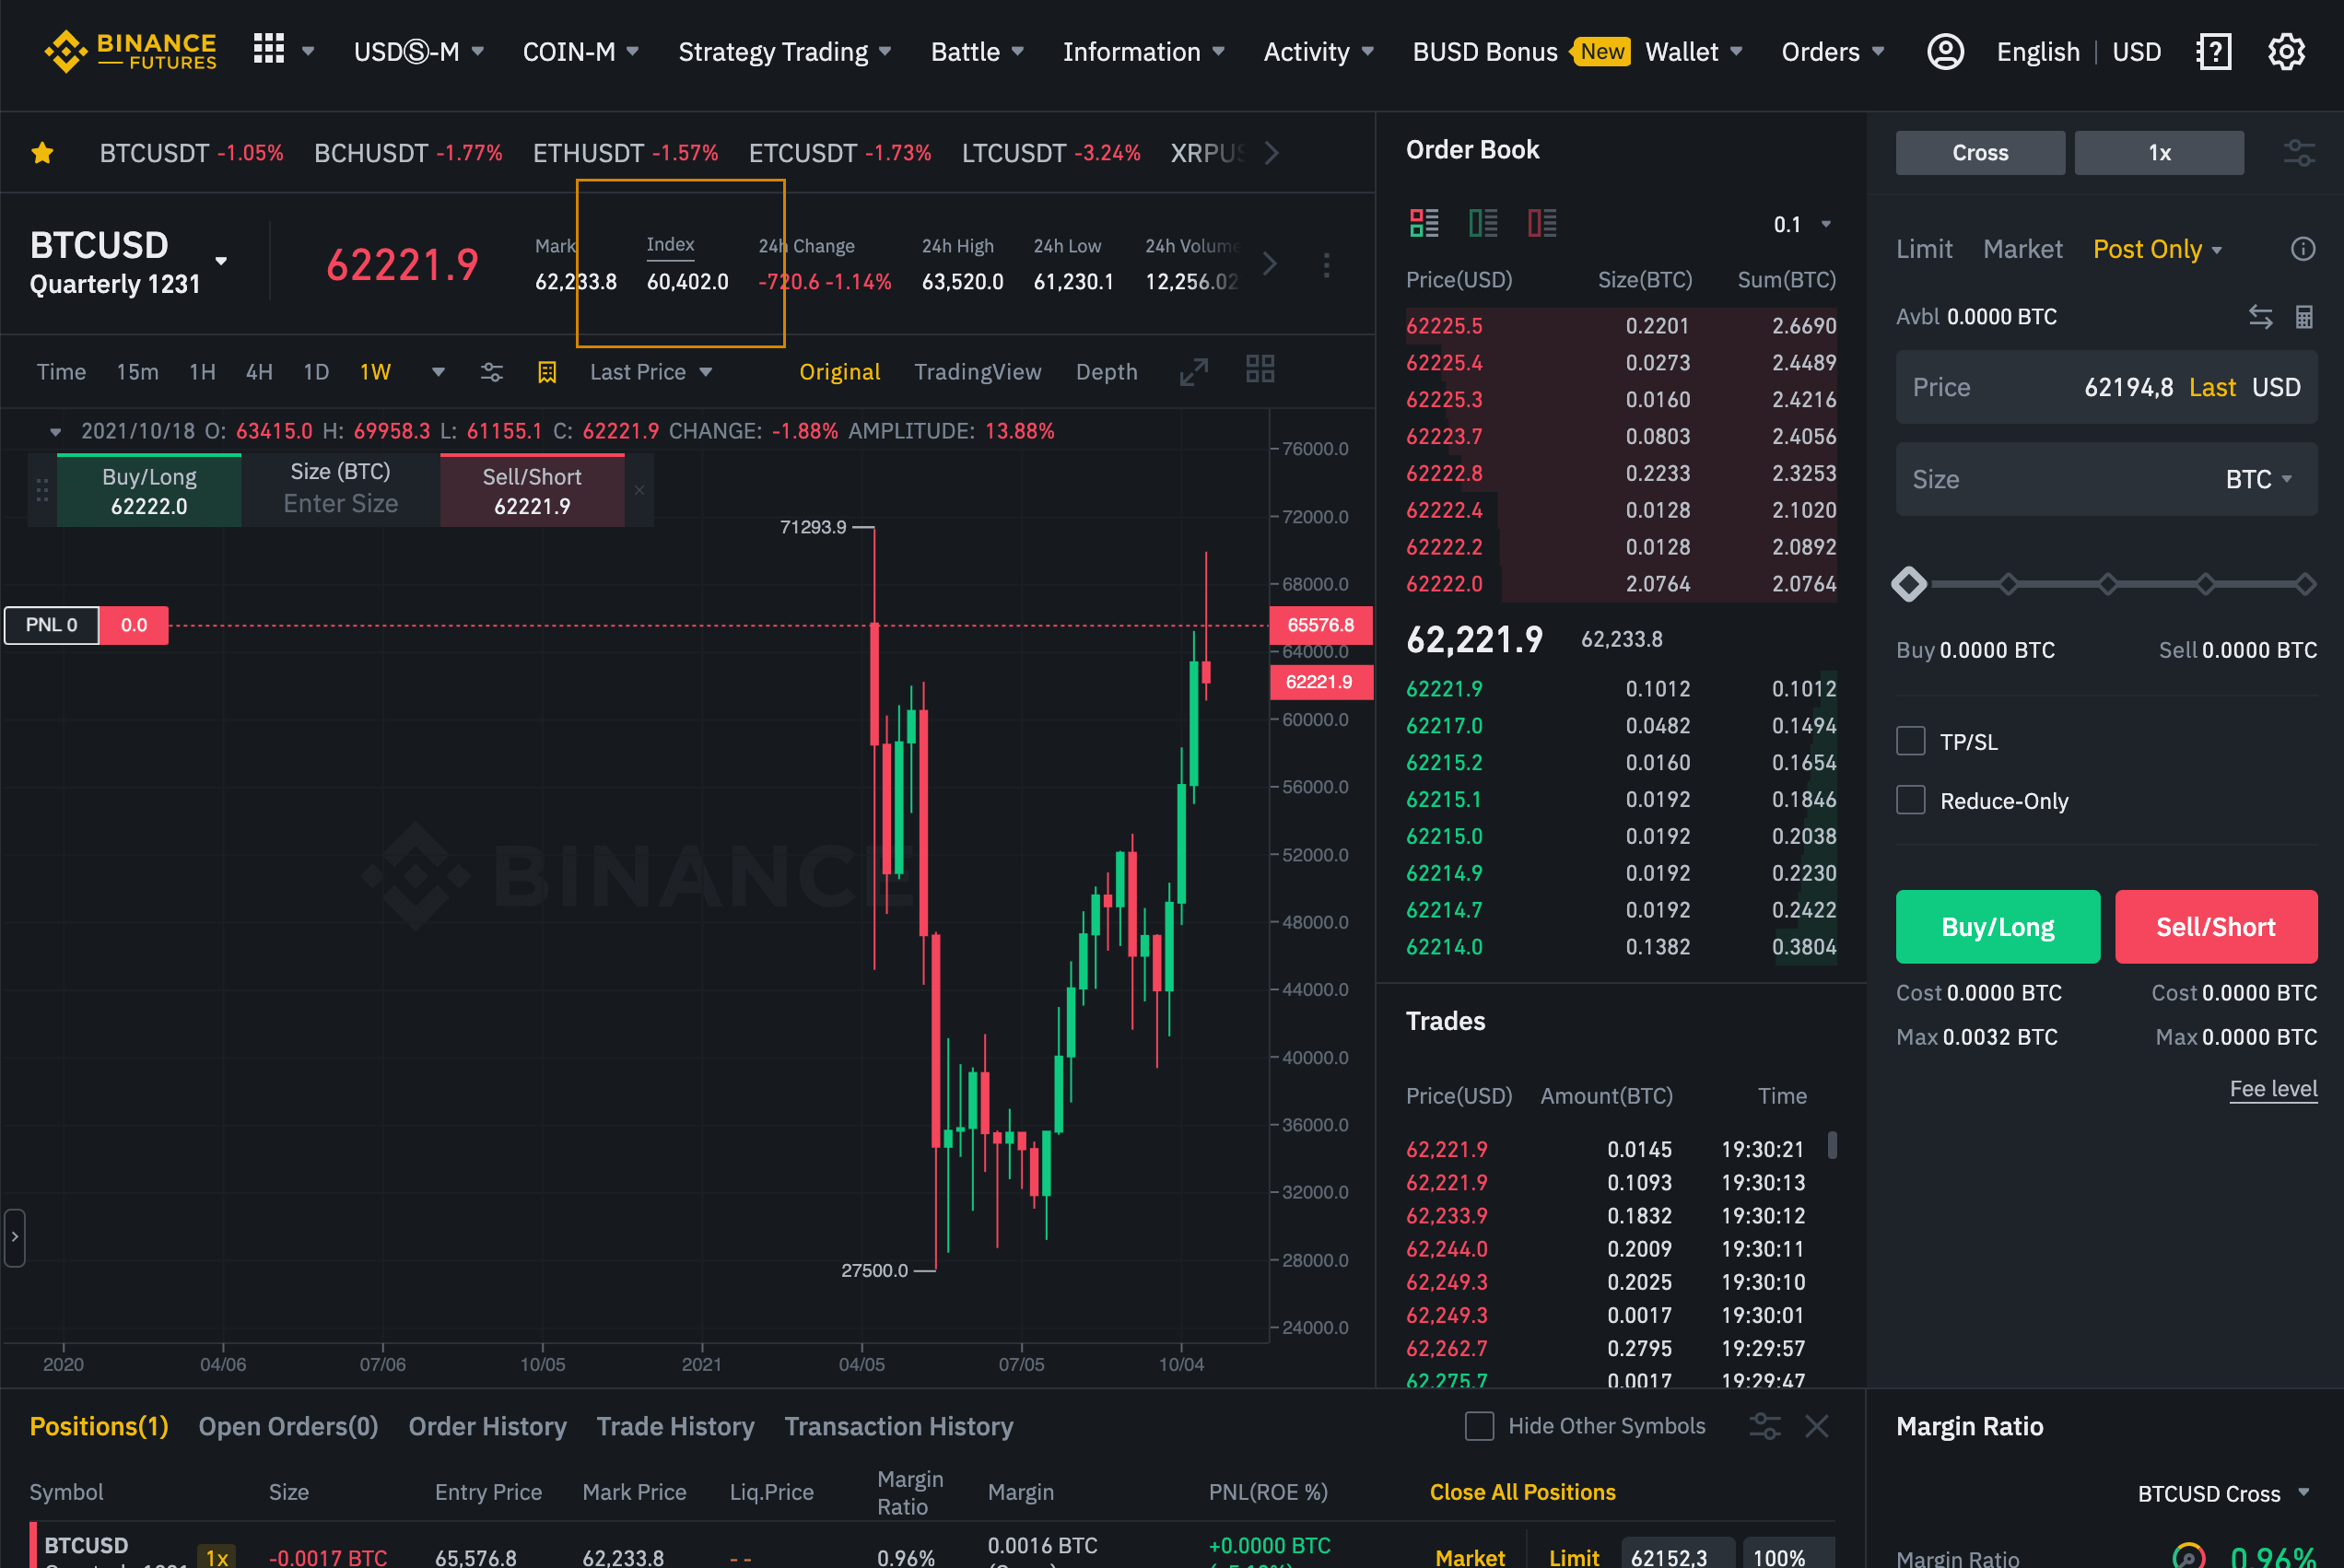 Bitcoin futures marketplace with delivery date 12/31/2021. It shows that the futures are traded at a higher price than the current spot price of BTC.